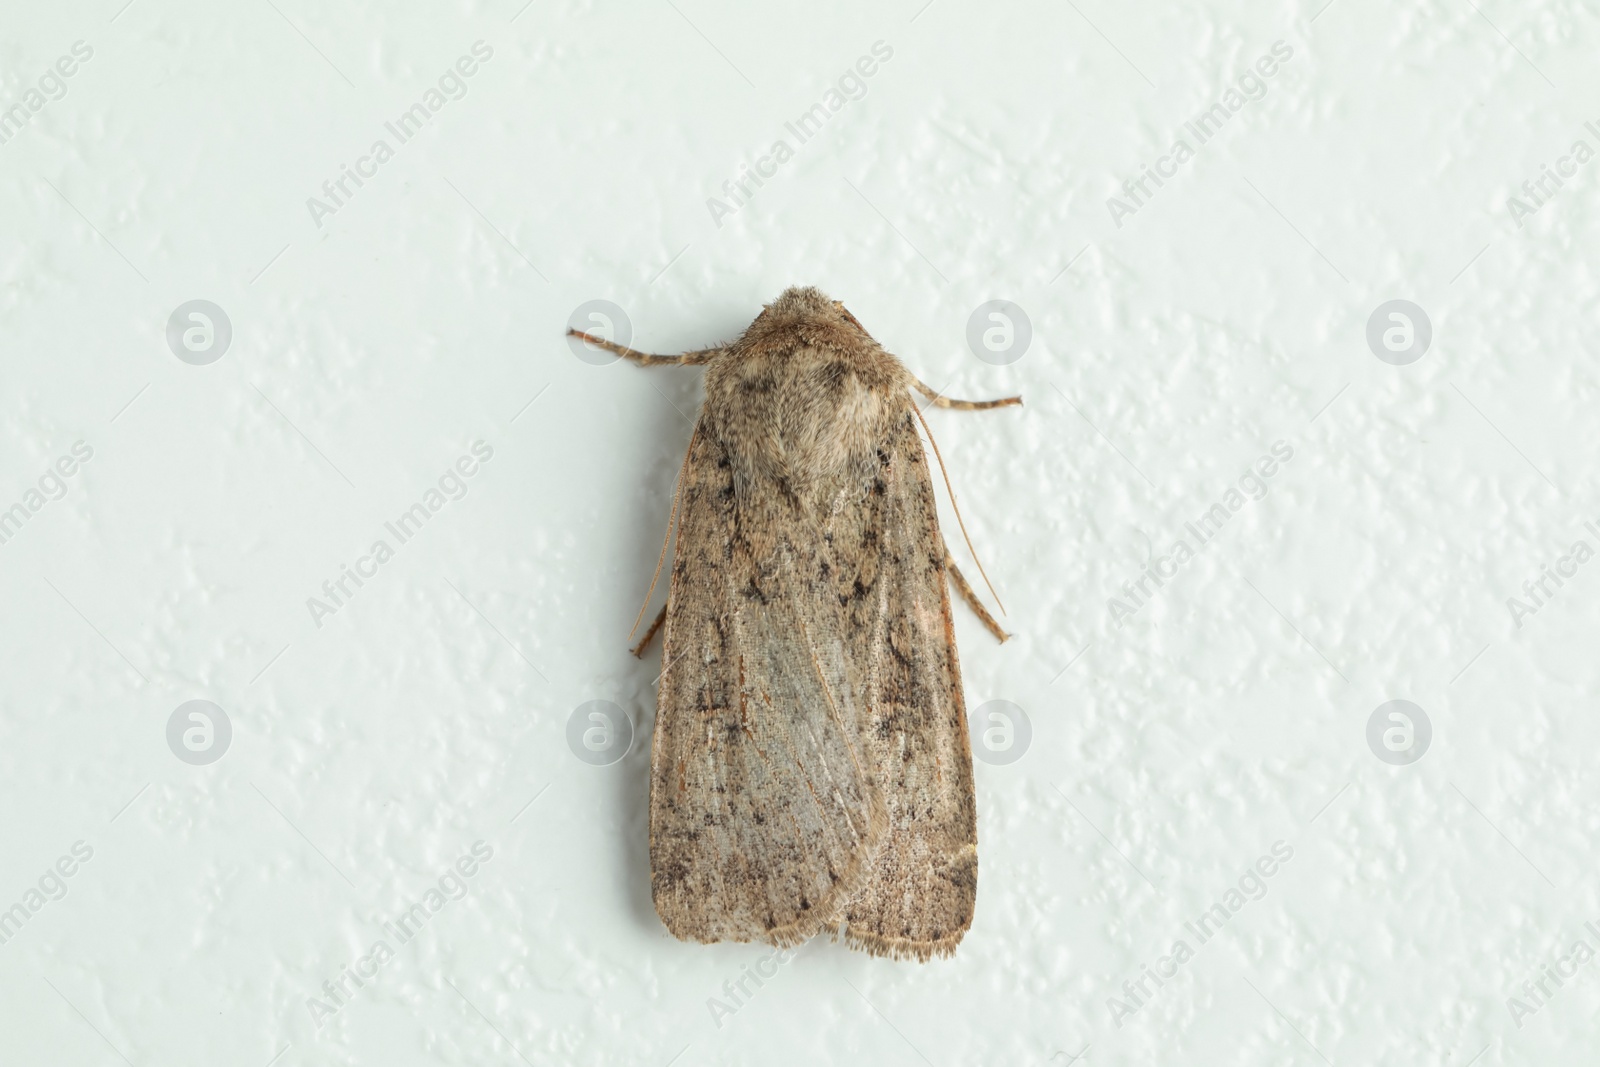 Photo of Paradrina clavipalpis moth on white textured background, top view